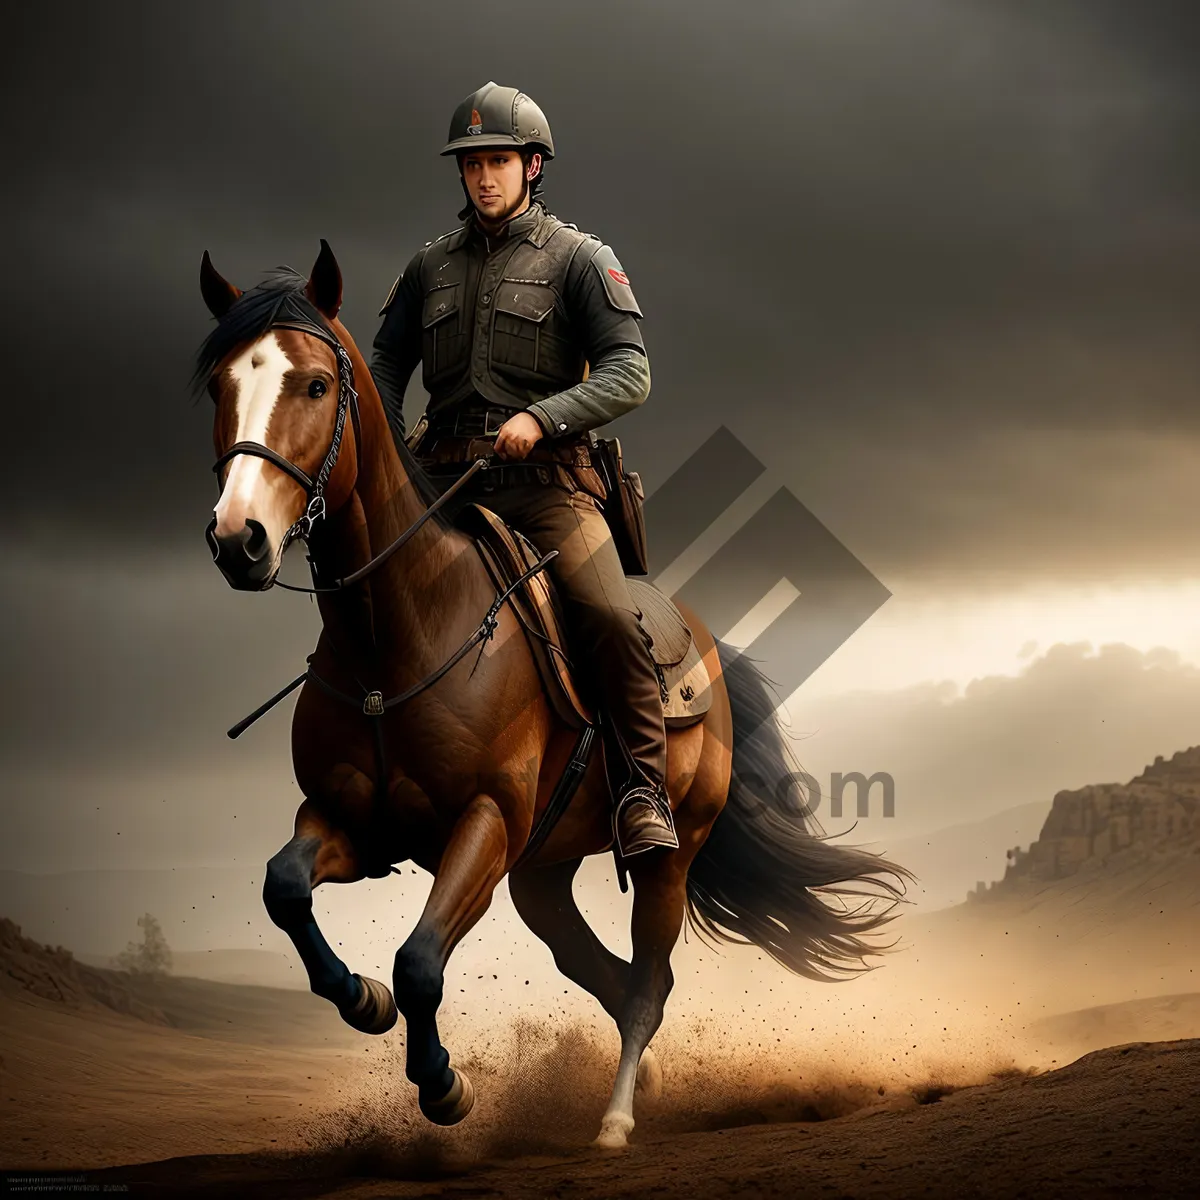 Picture of Equestrian rider on horseback with saddle and bridle.